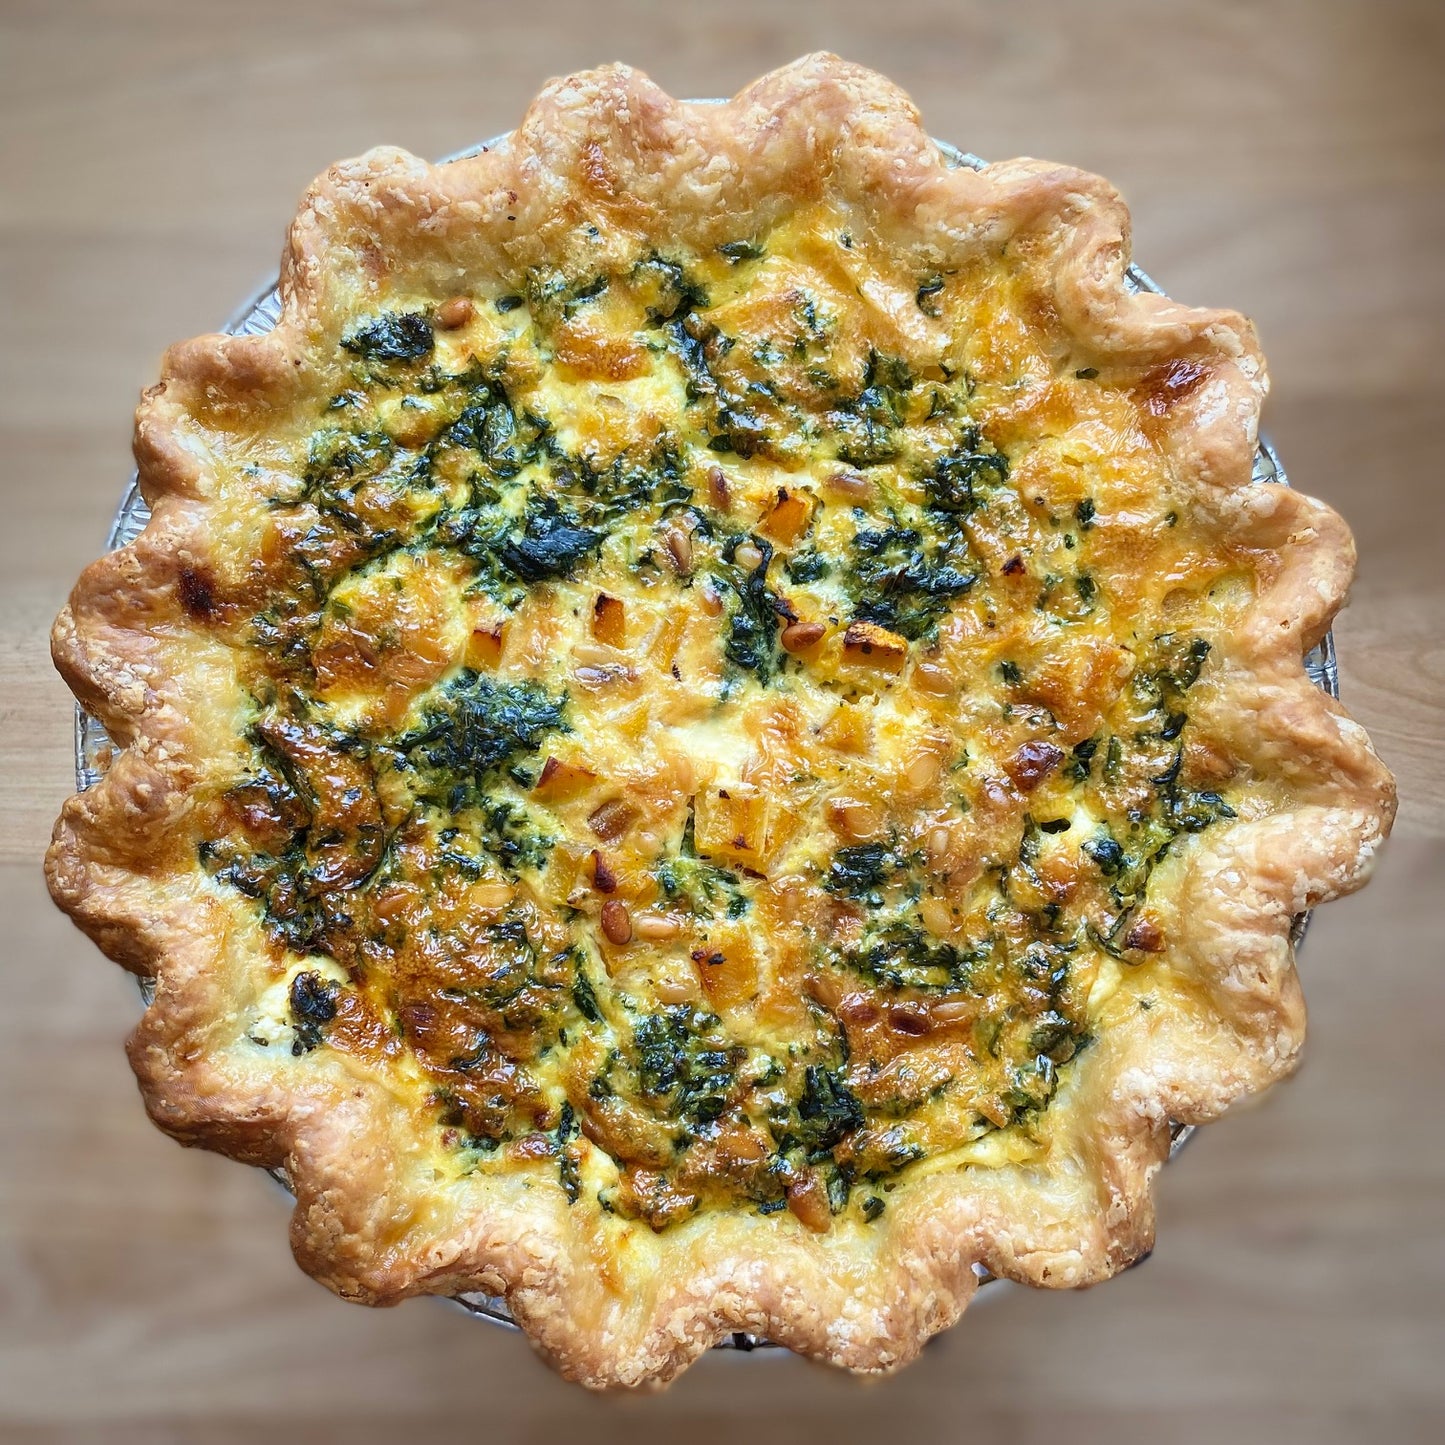 Quiche: Roasted Butternut Squash, Spinach, Goat Cheese & Toasted Pine Nuts (veg)